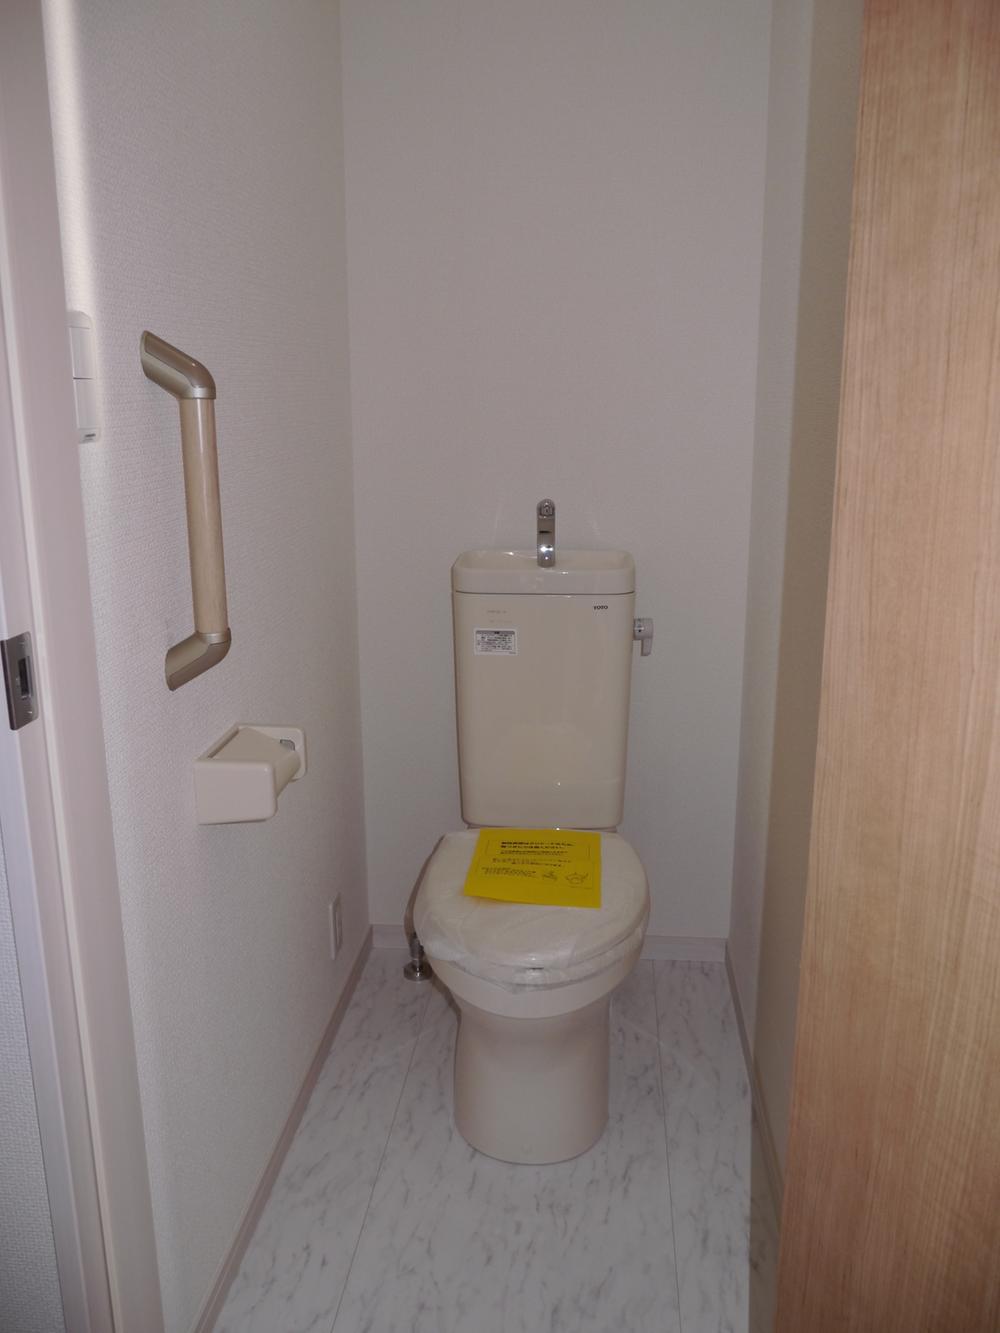 Same specifications photos (Other introspection). Indoor (December 7, 2013) Shooting Second floor toilet